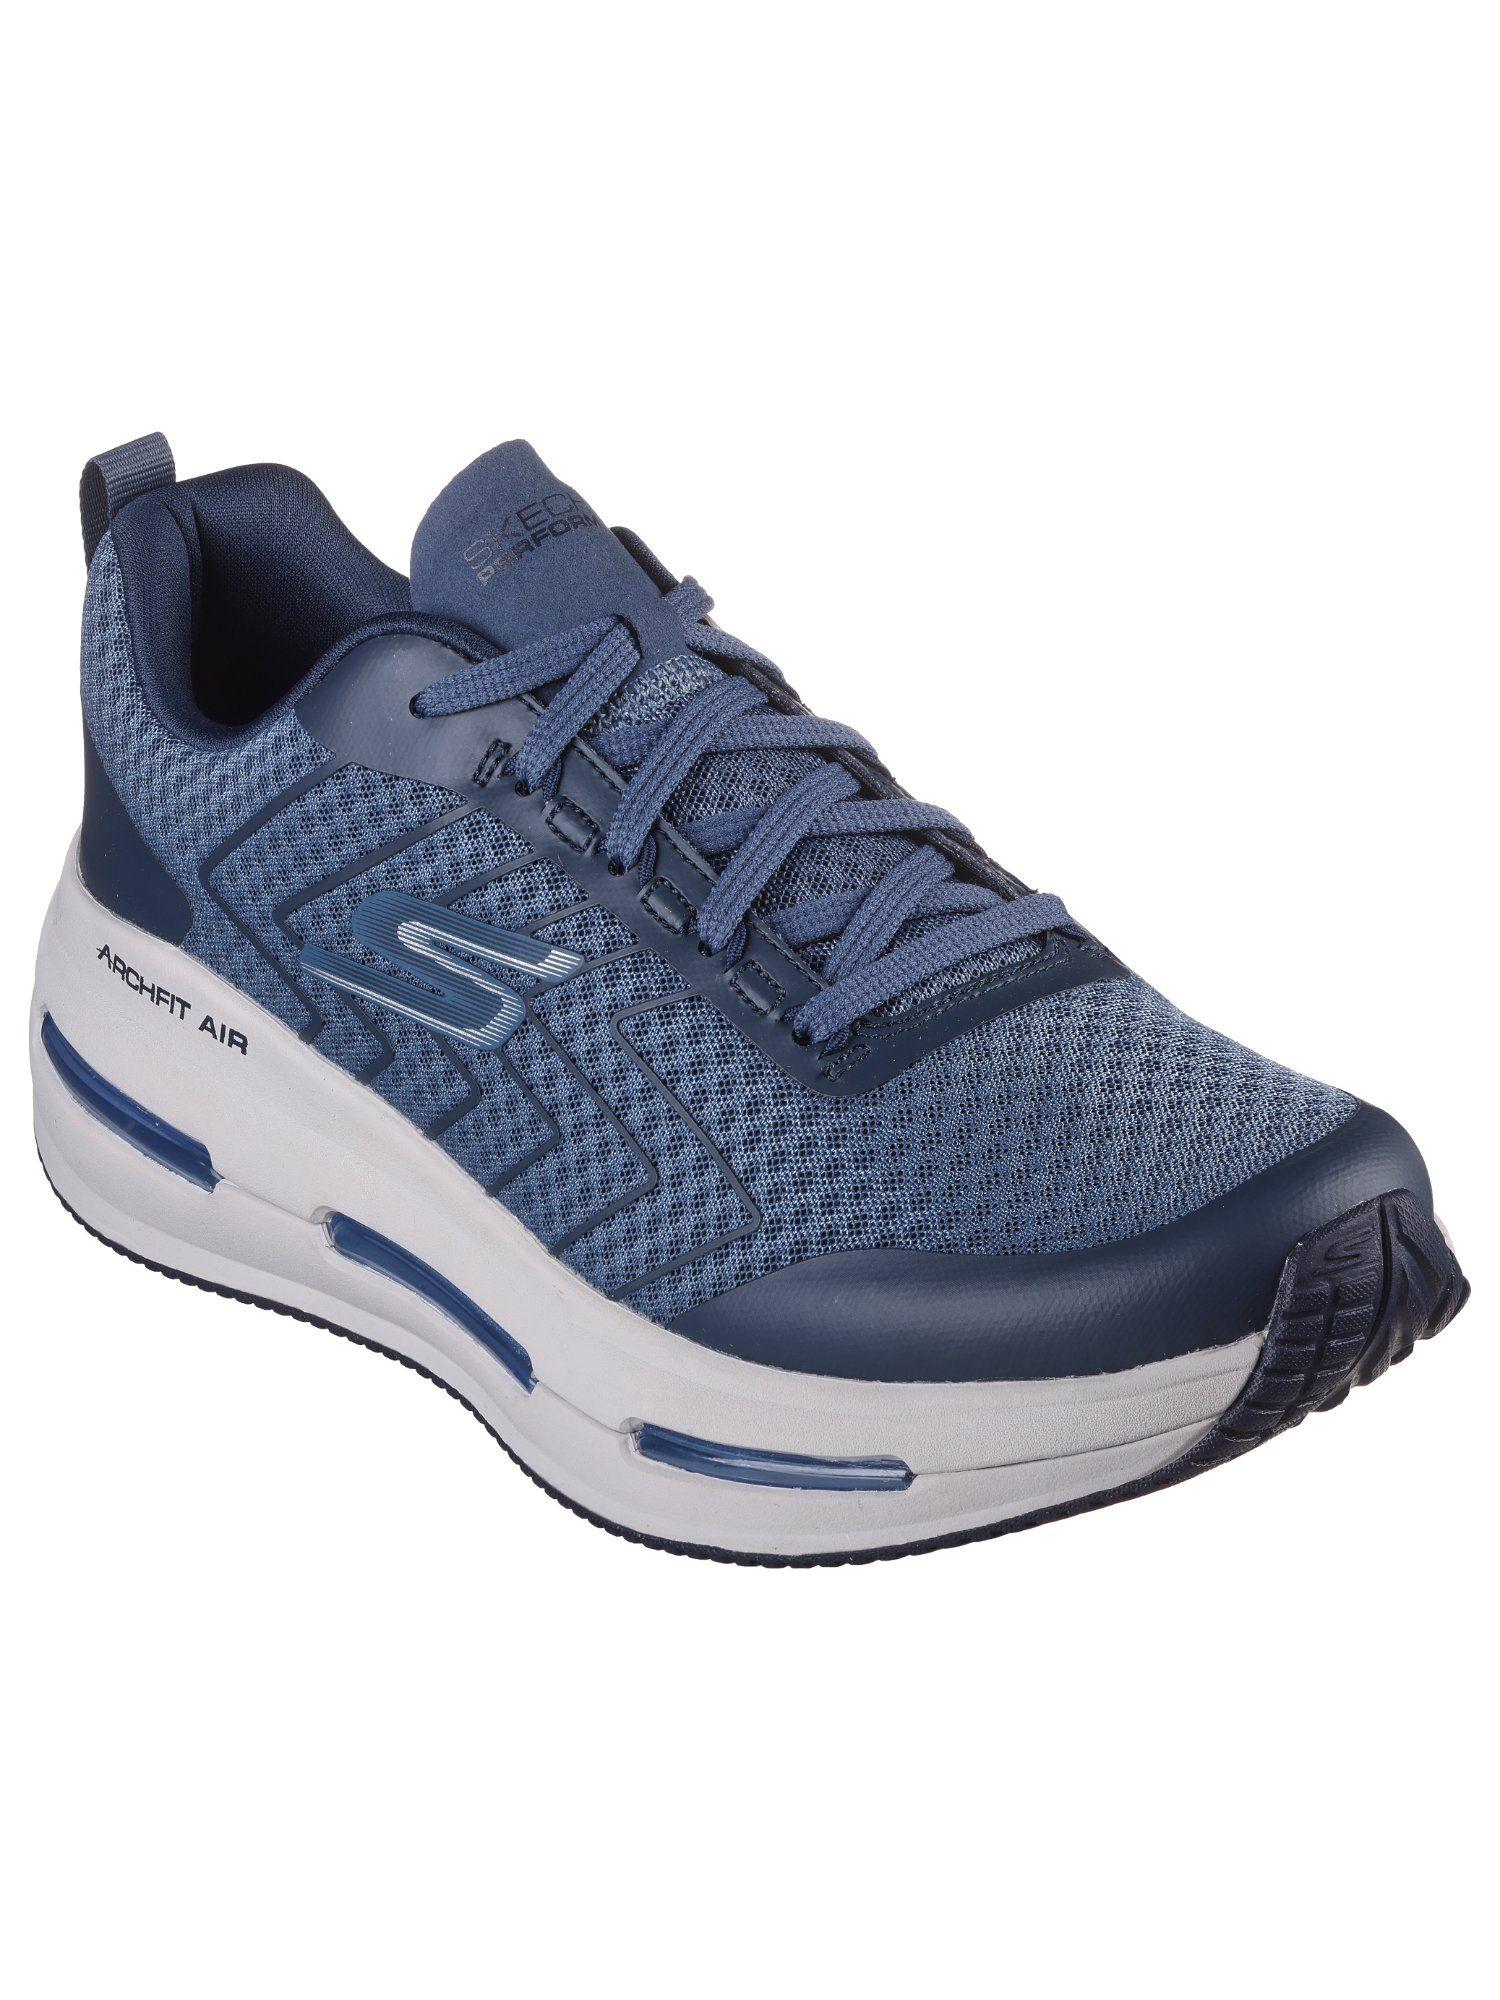 MAX CUSHIONING ARCH Navy Blue Running Shoes